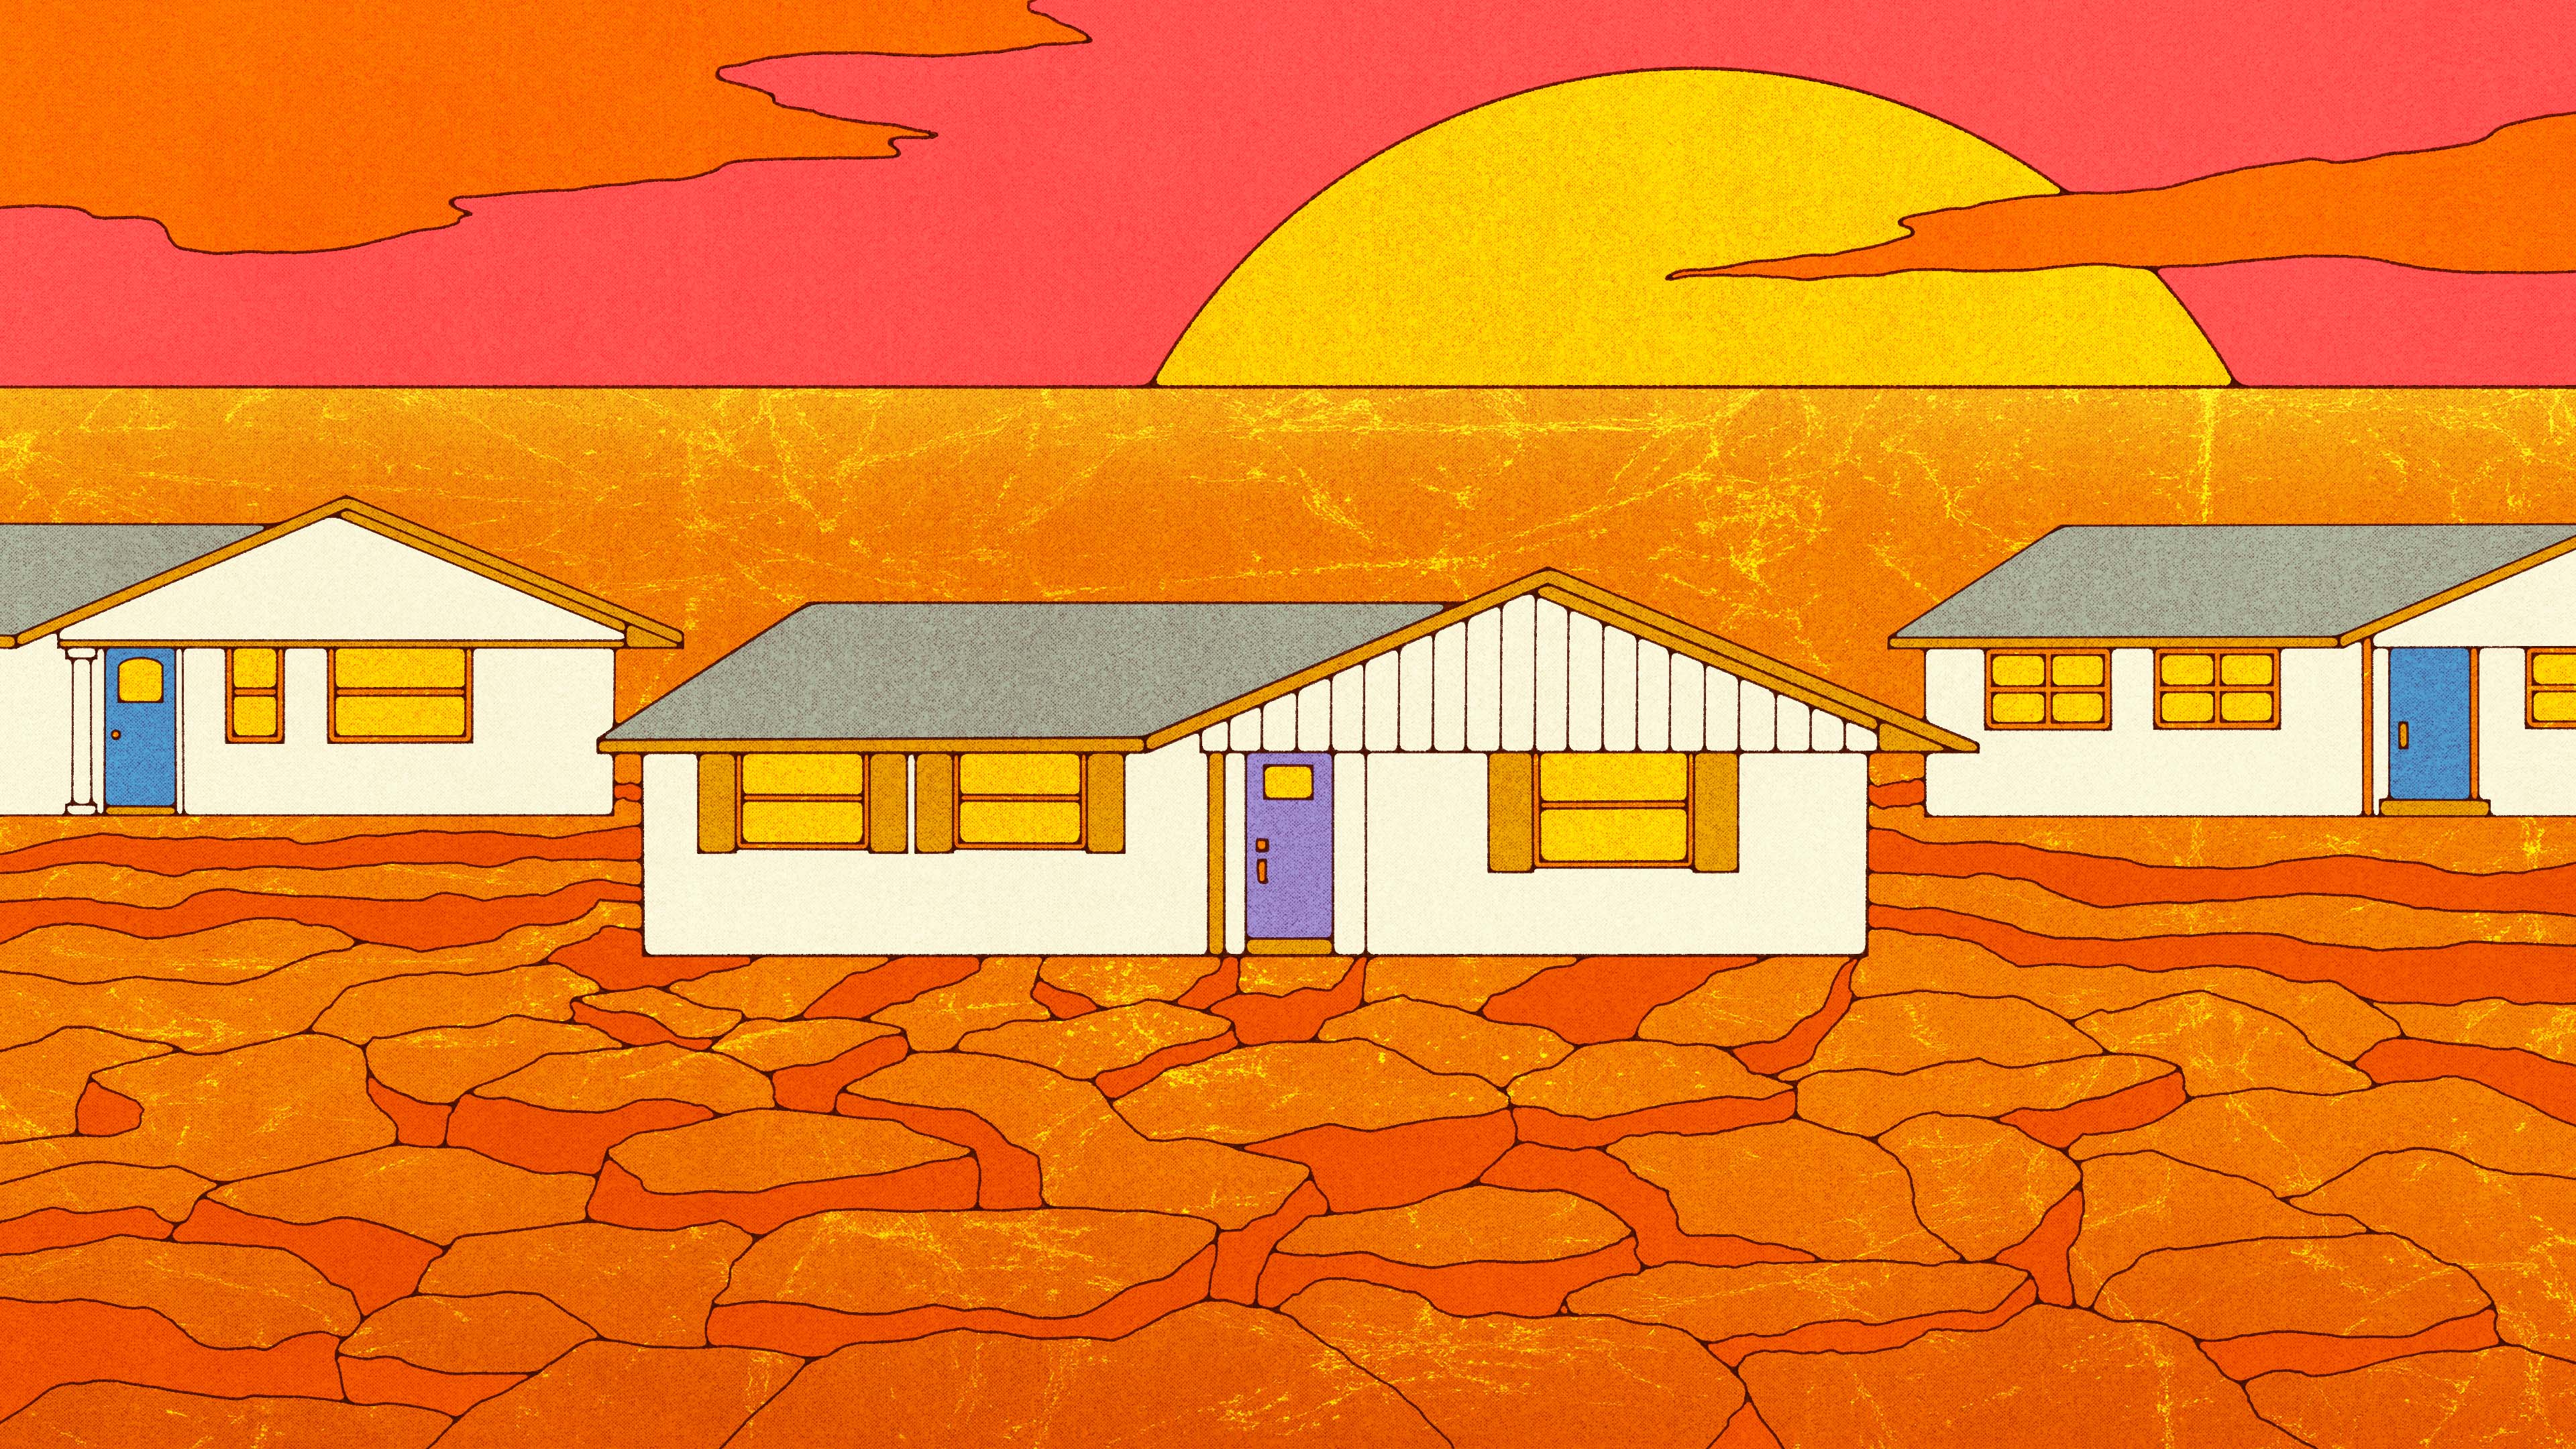 Three houses surrounded by dry land and orange sky